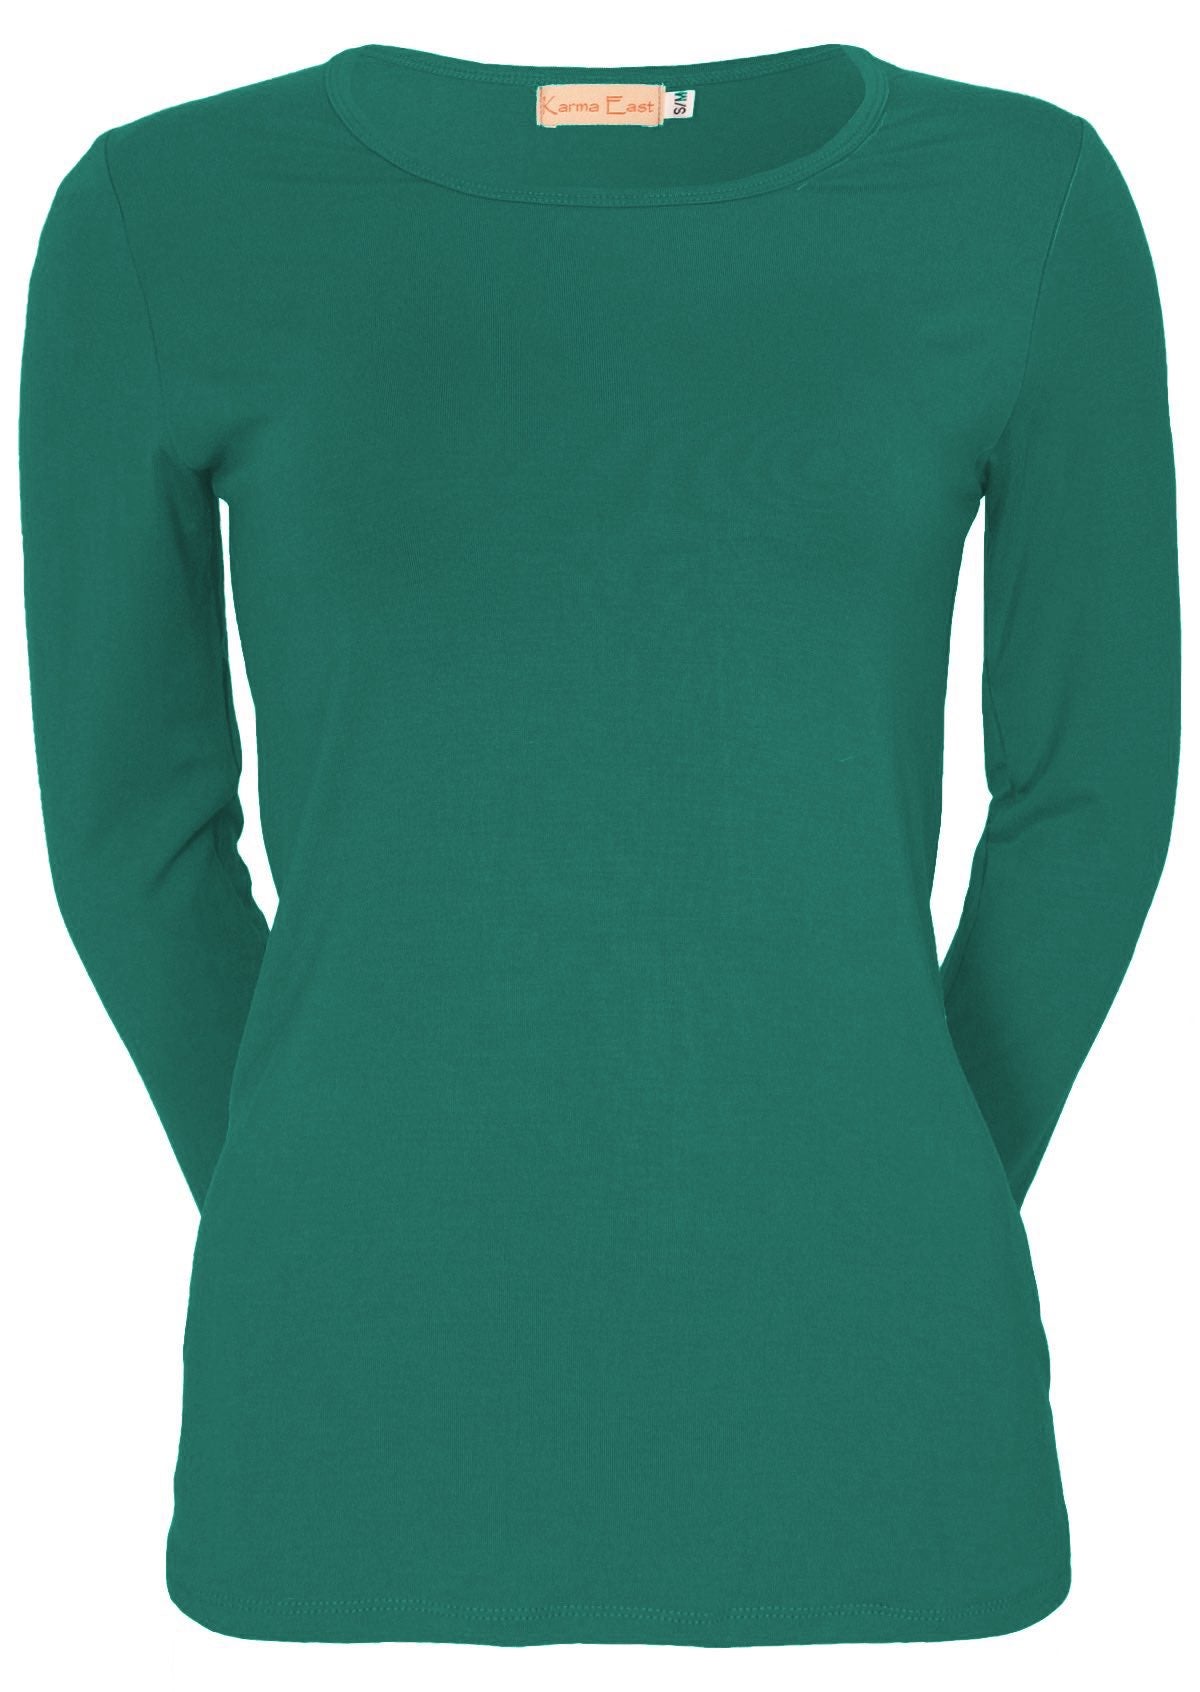 Front view of women's round neck green long sleeve rayon top.